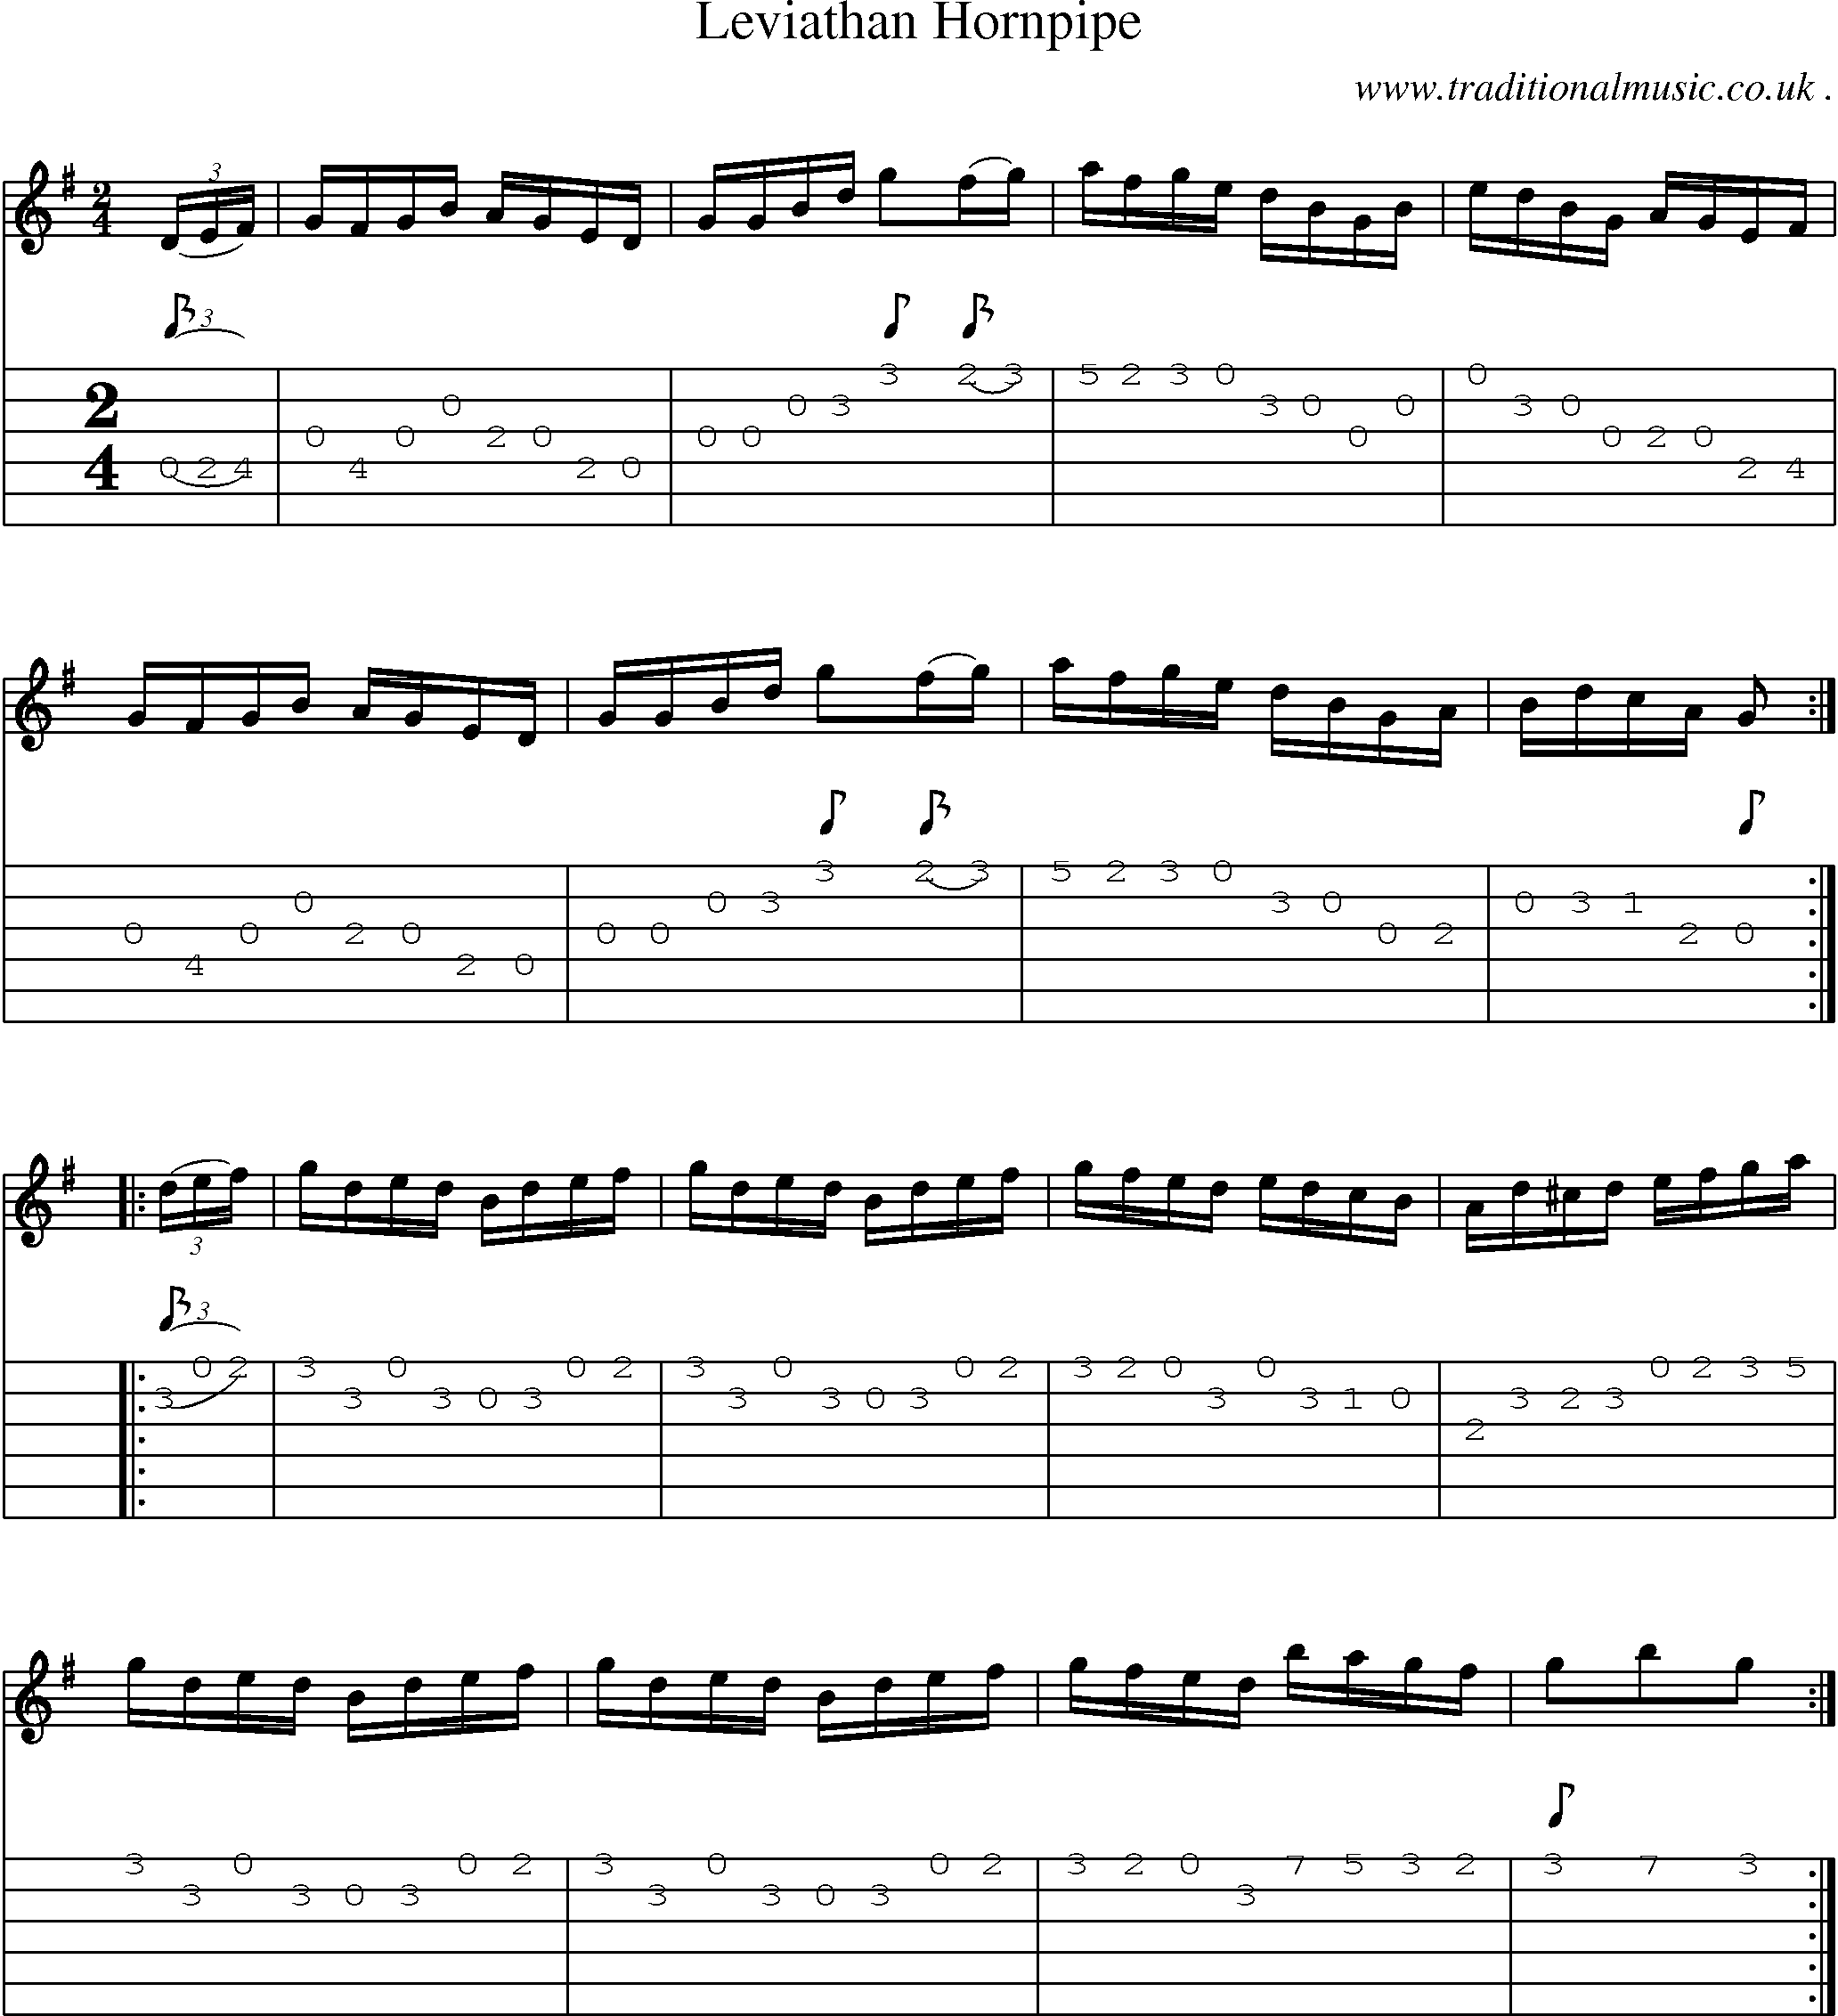 Sheet-Music and Guitar Tabs for Leviathan Hornpipe